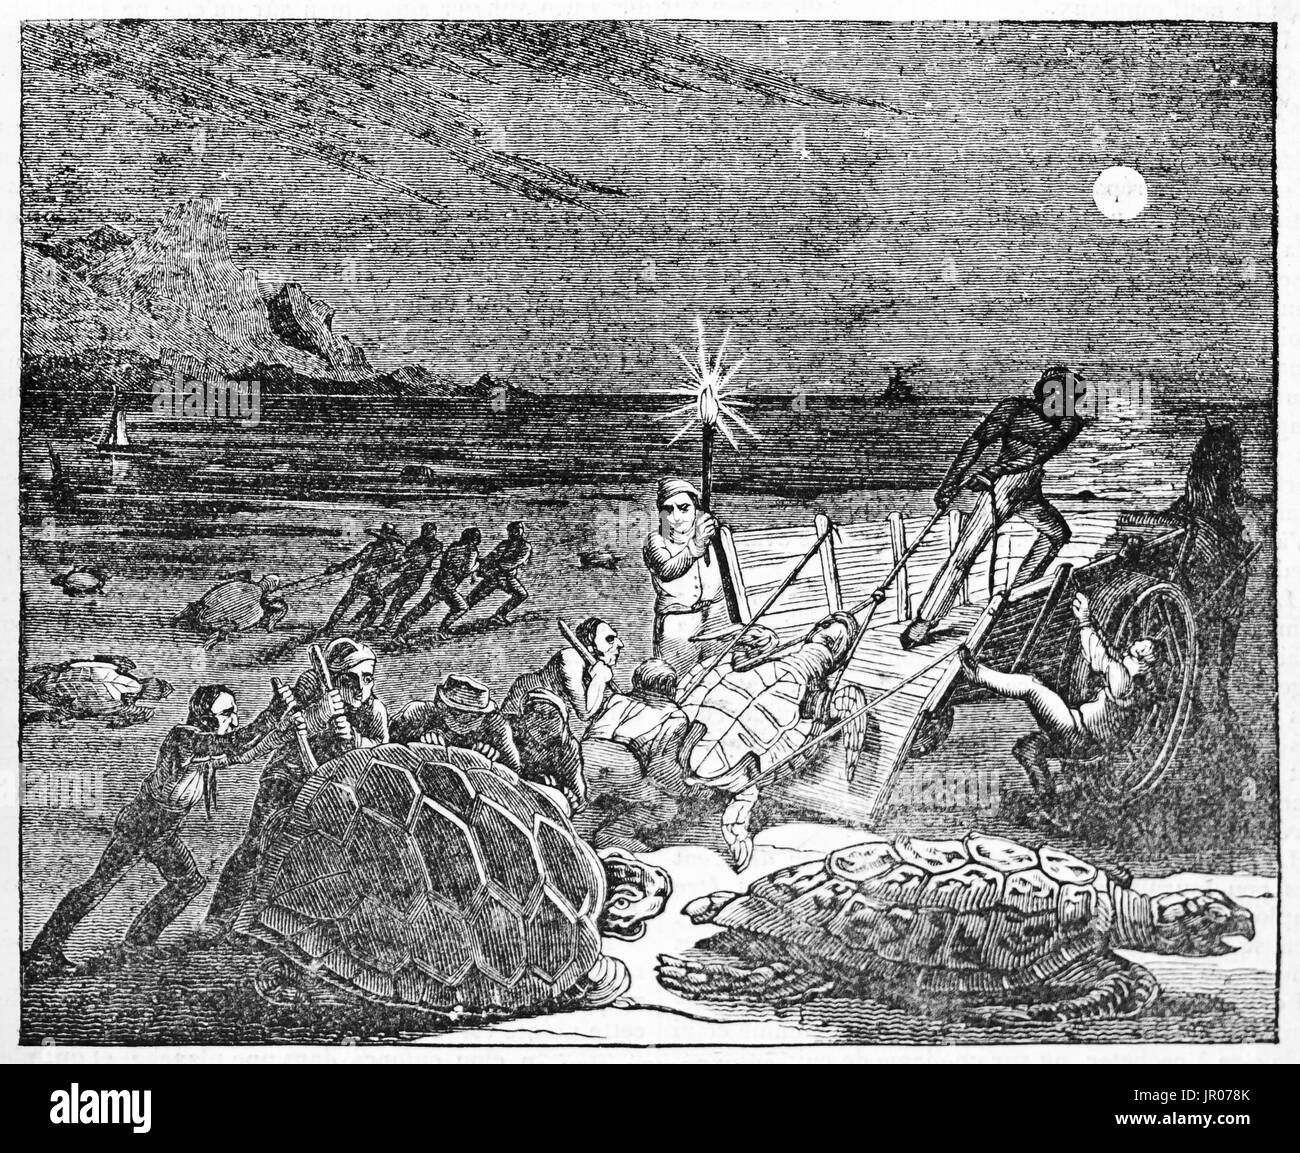 Old illustration of turtles fishing. By unidentified author, published on Magasin Pittoresque, Paris, 1833. Stock Photo